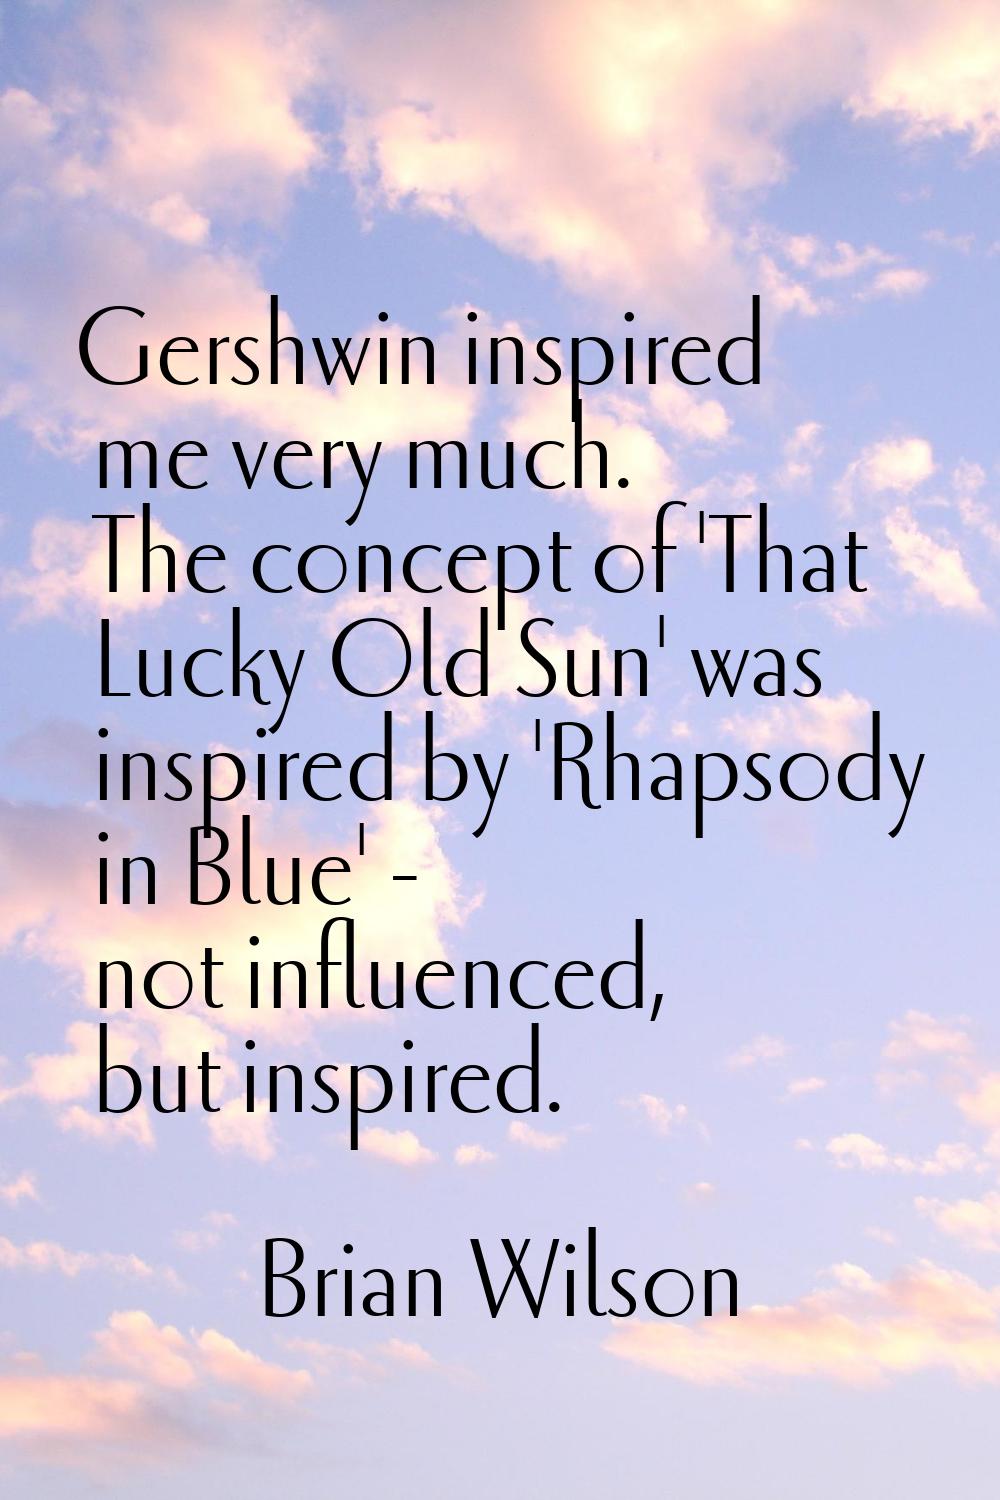 Gershwin inspired me very much. The concept of 'That Lucky Old Sun' was inspired by 'Rhapsody in Bl